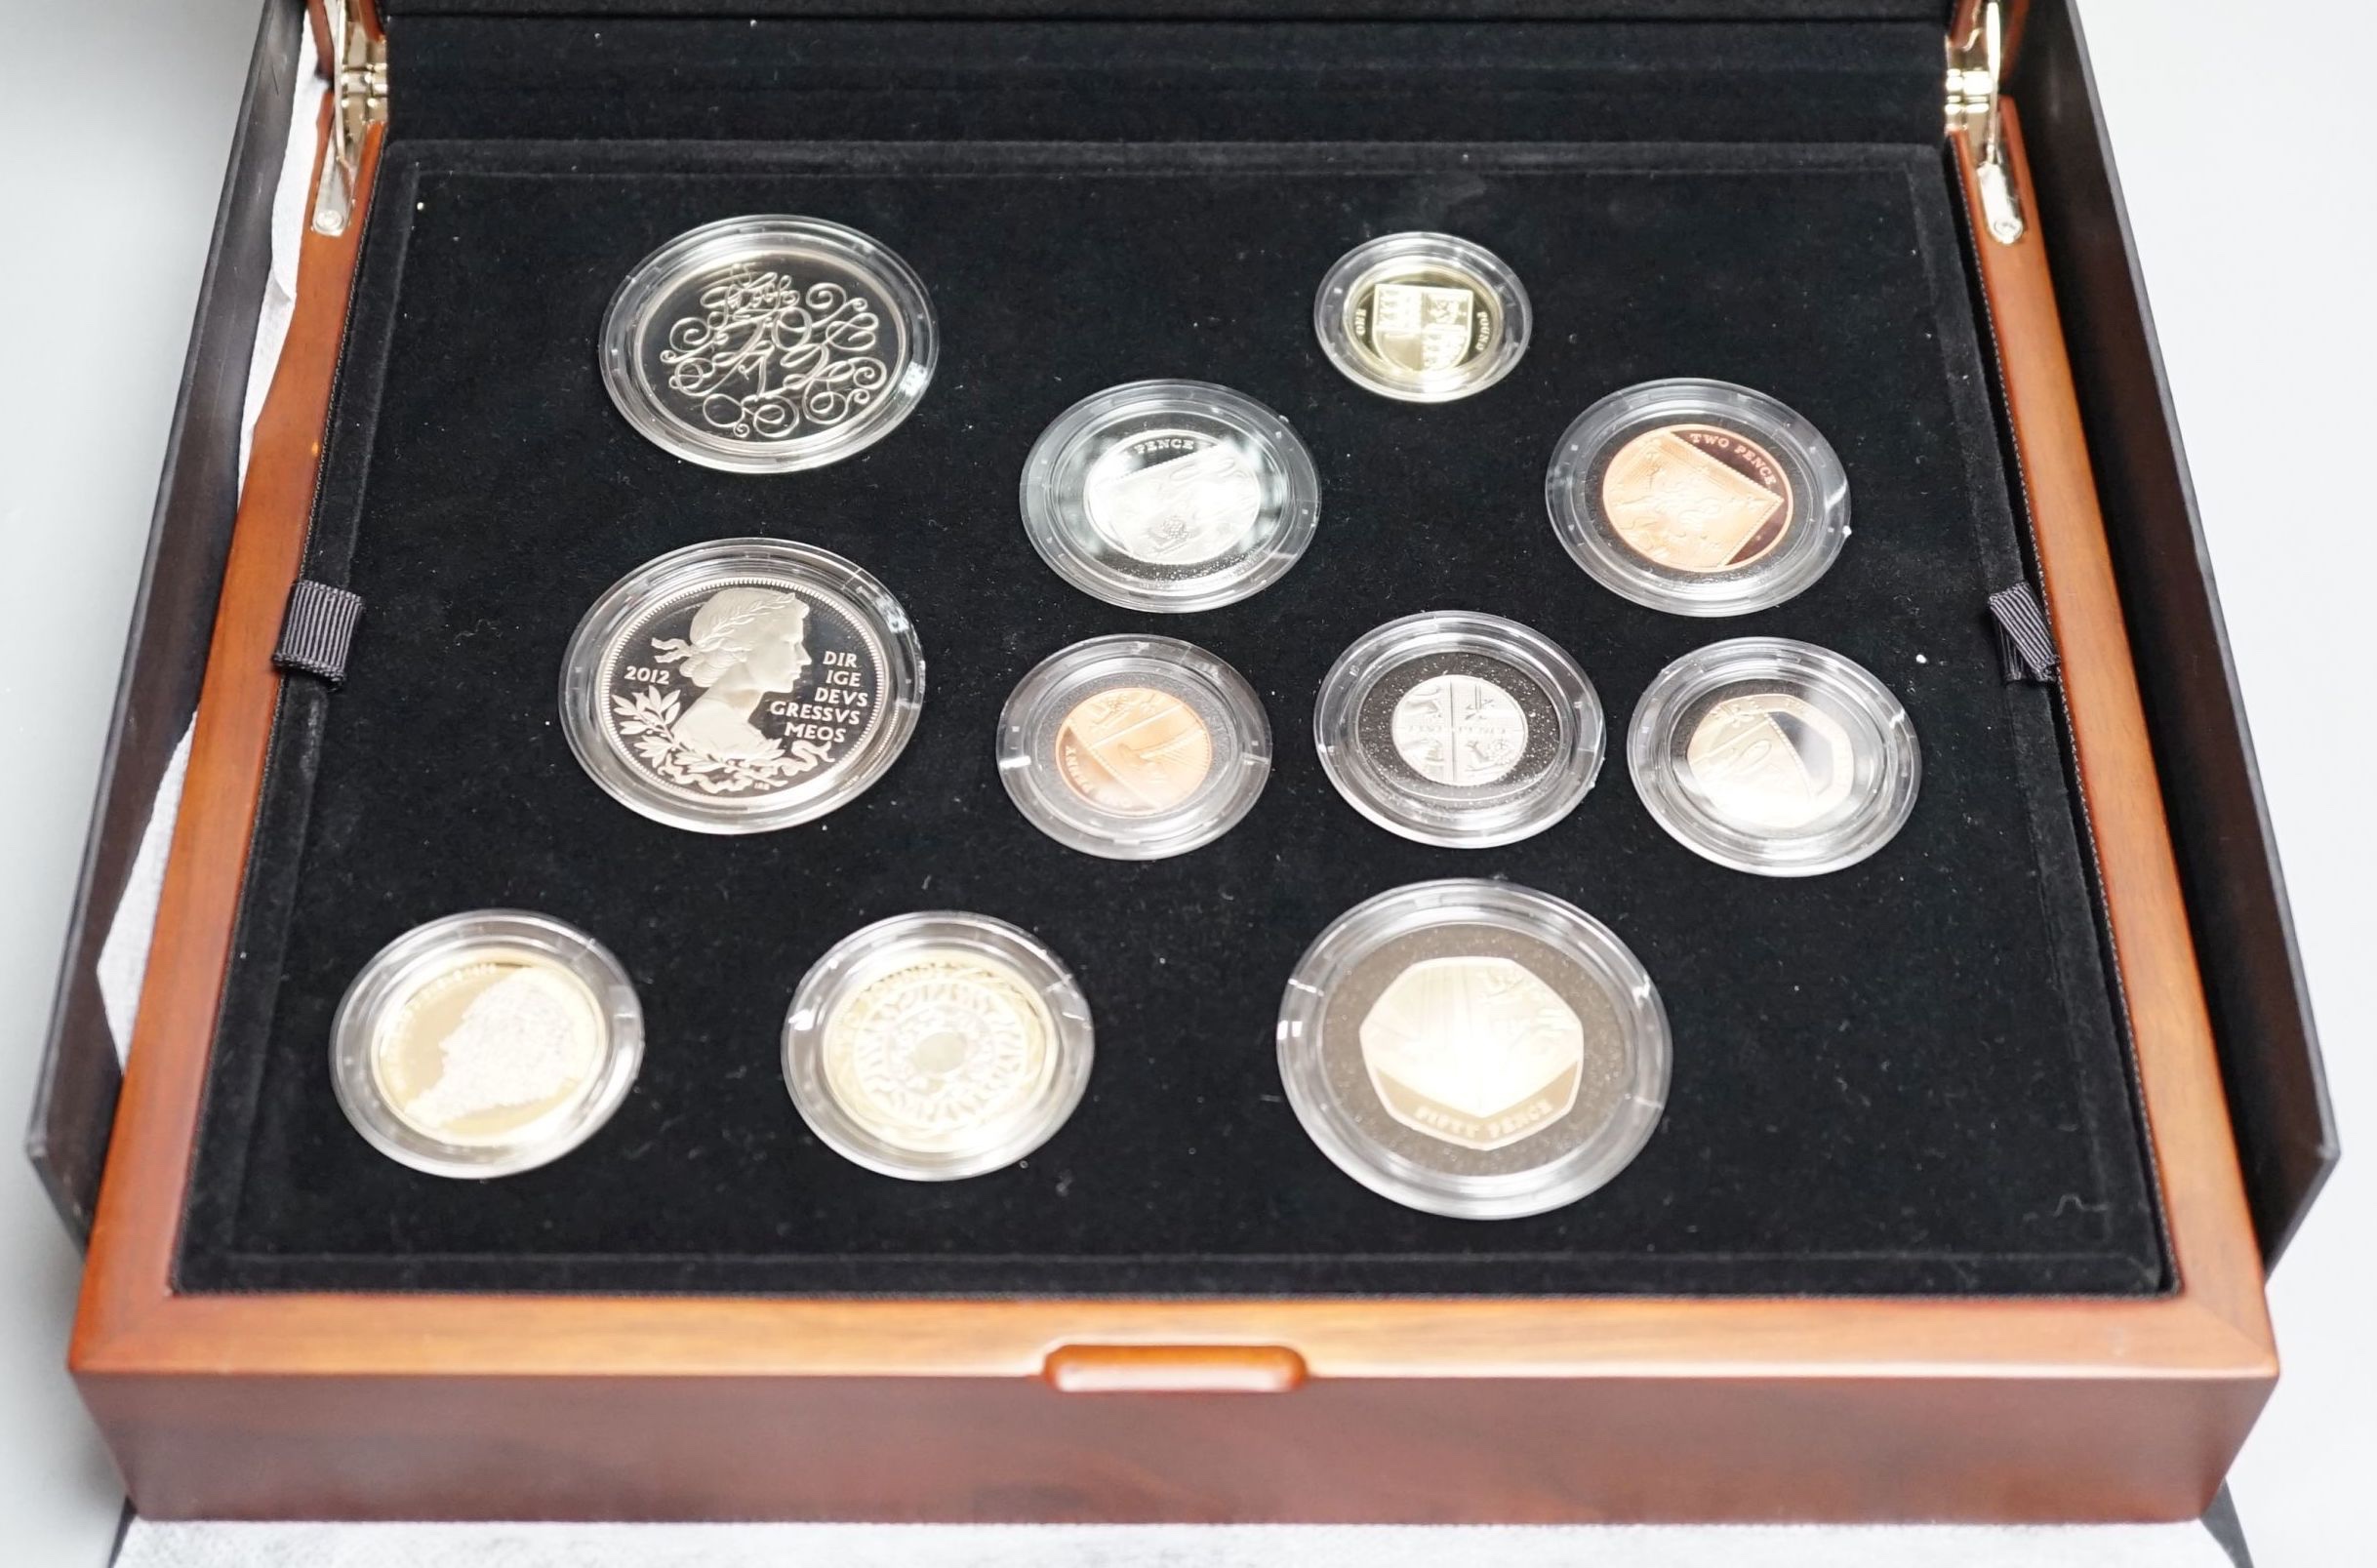 A 2012 UK premium proof coin collection